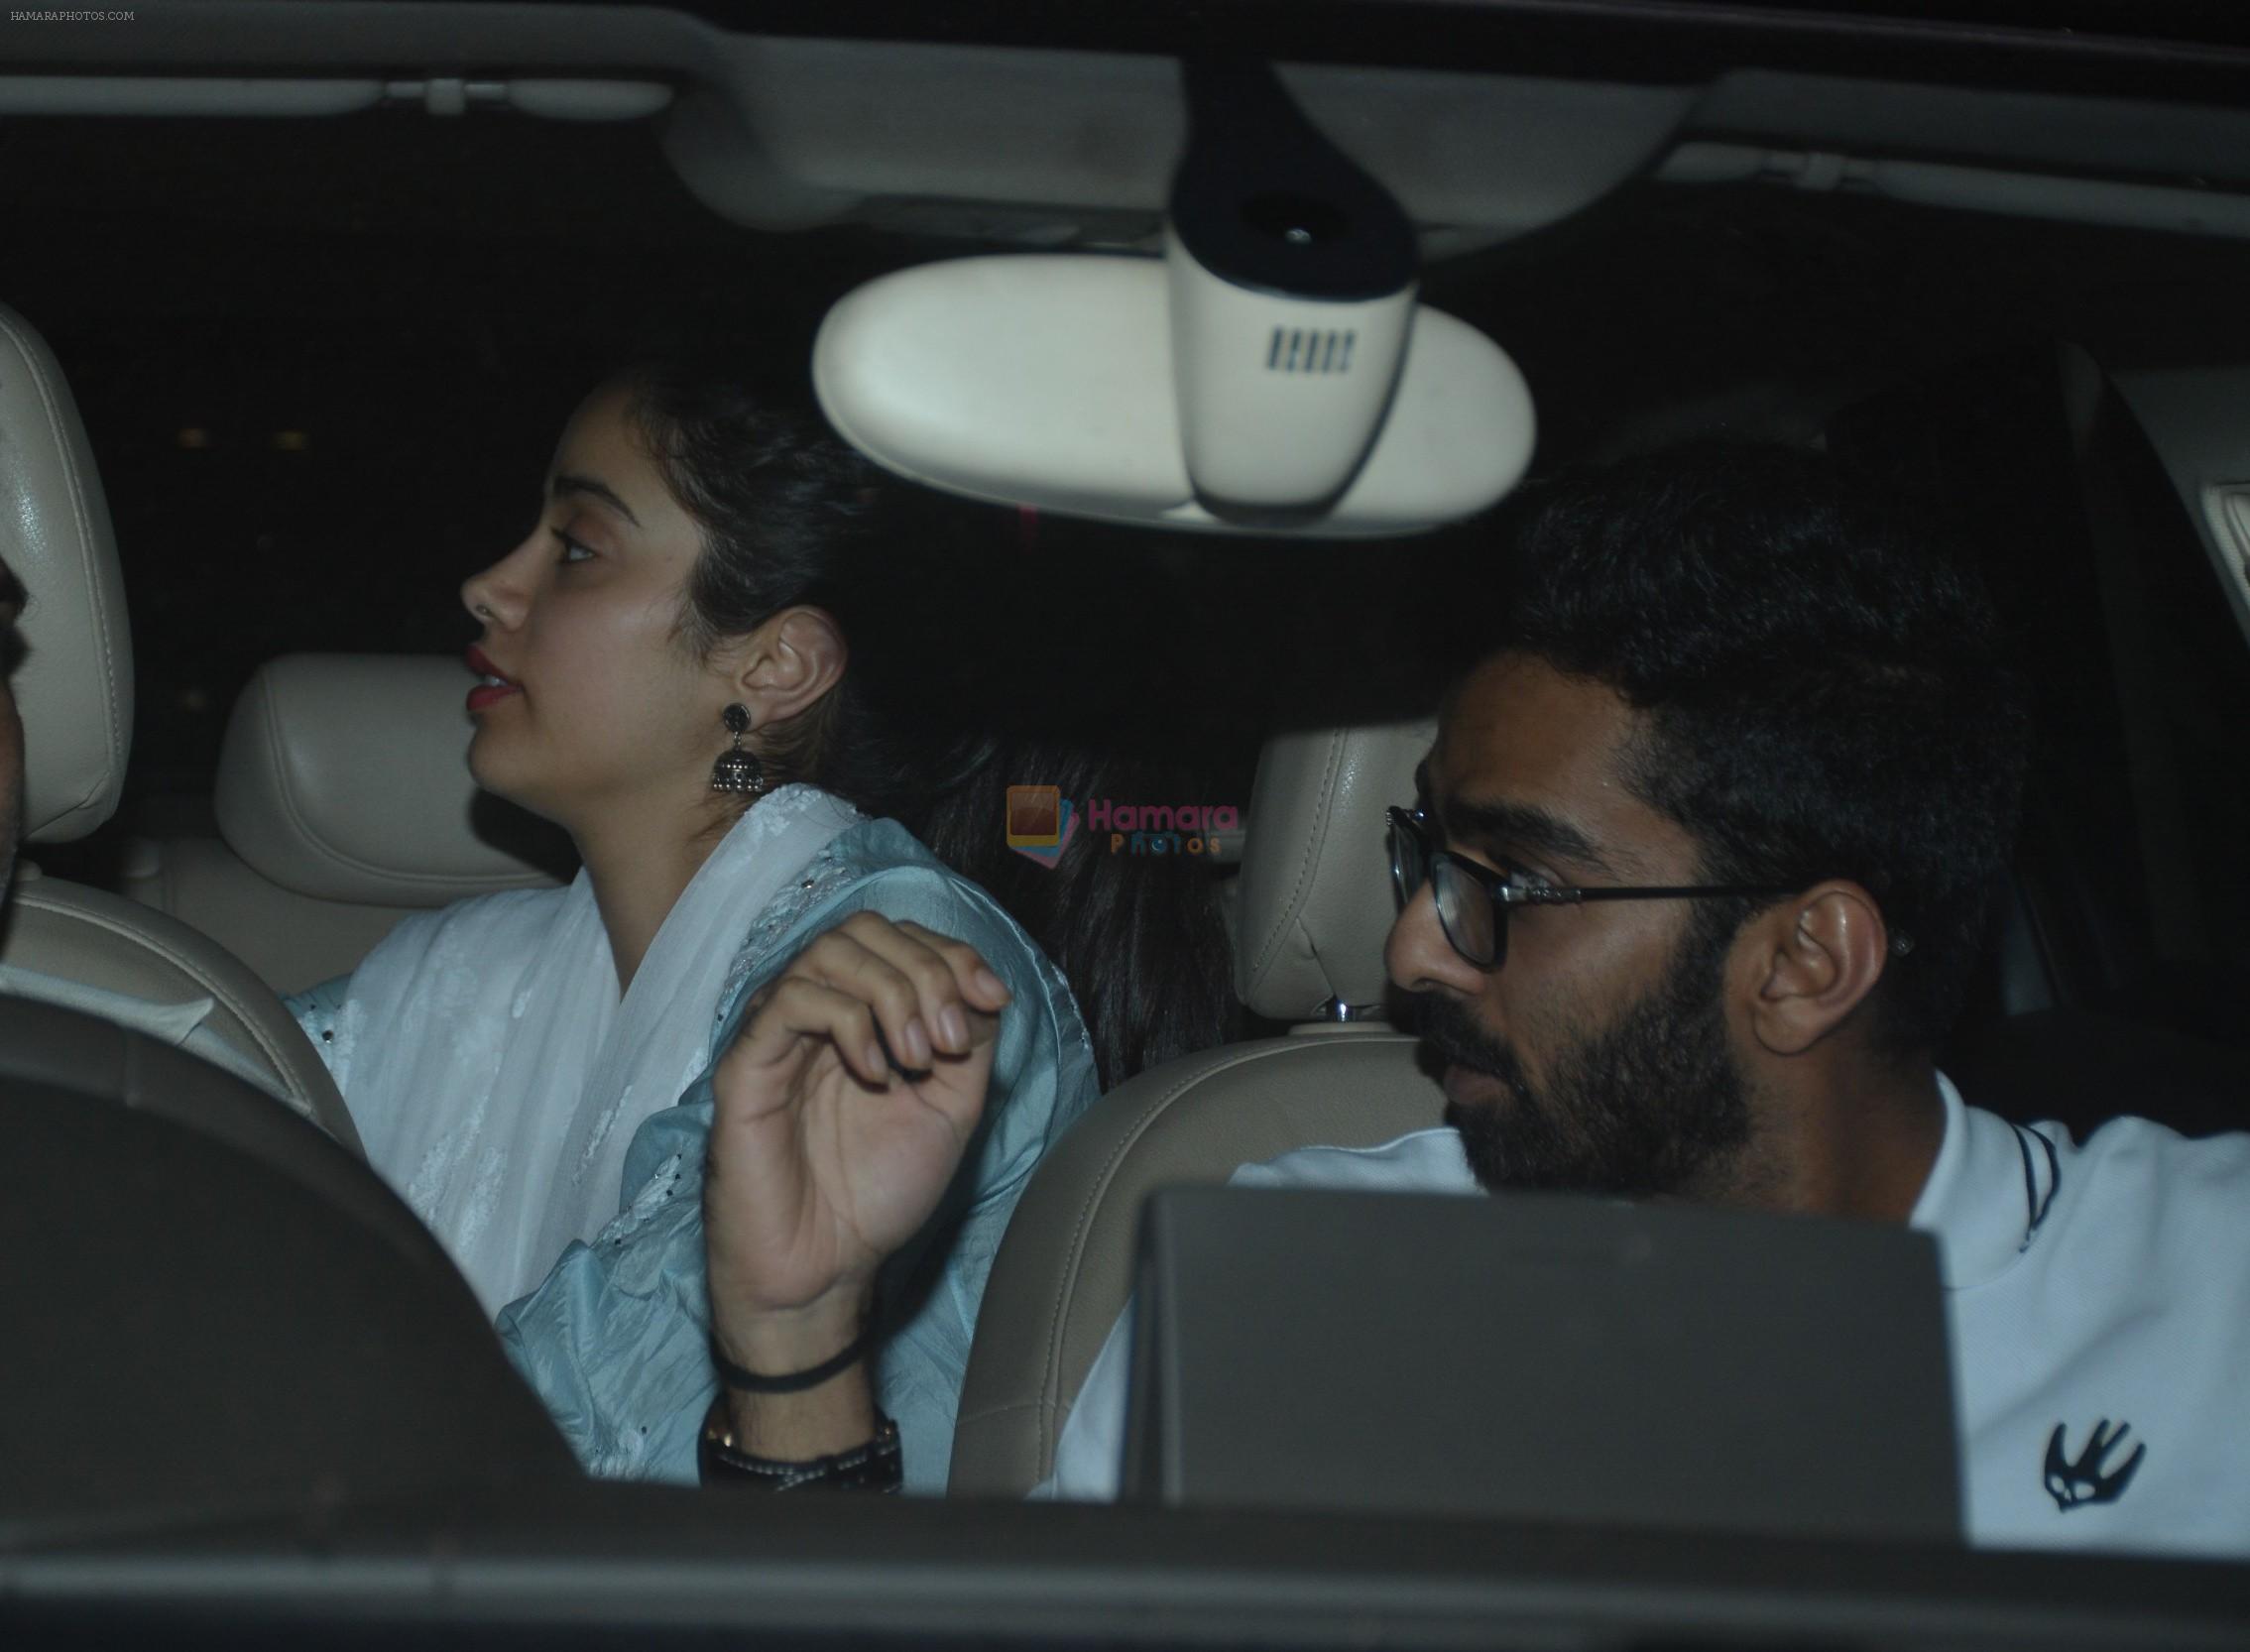 Janhvi Kapoor spotted at Bastian in bandra on 15th Aug 2018